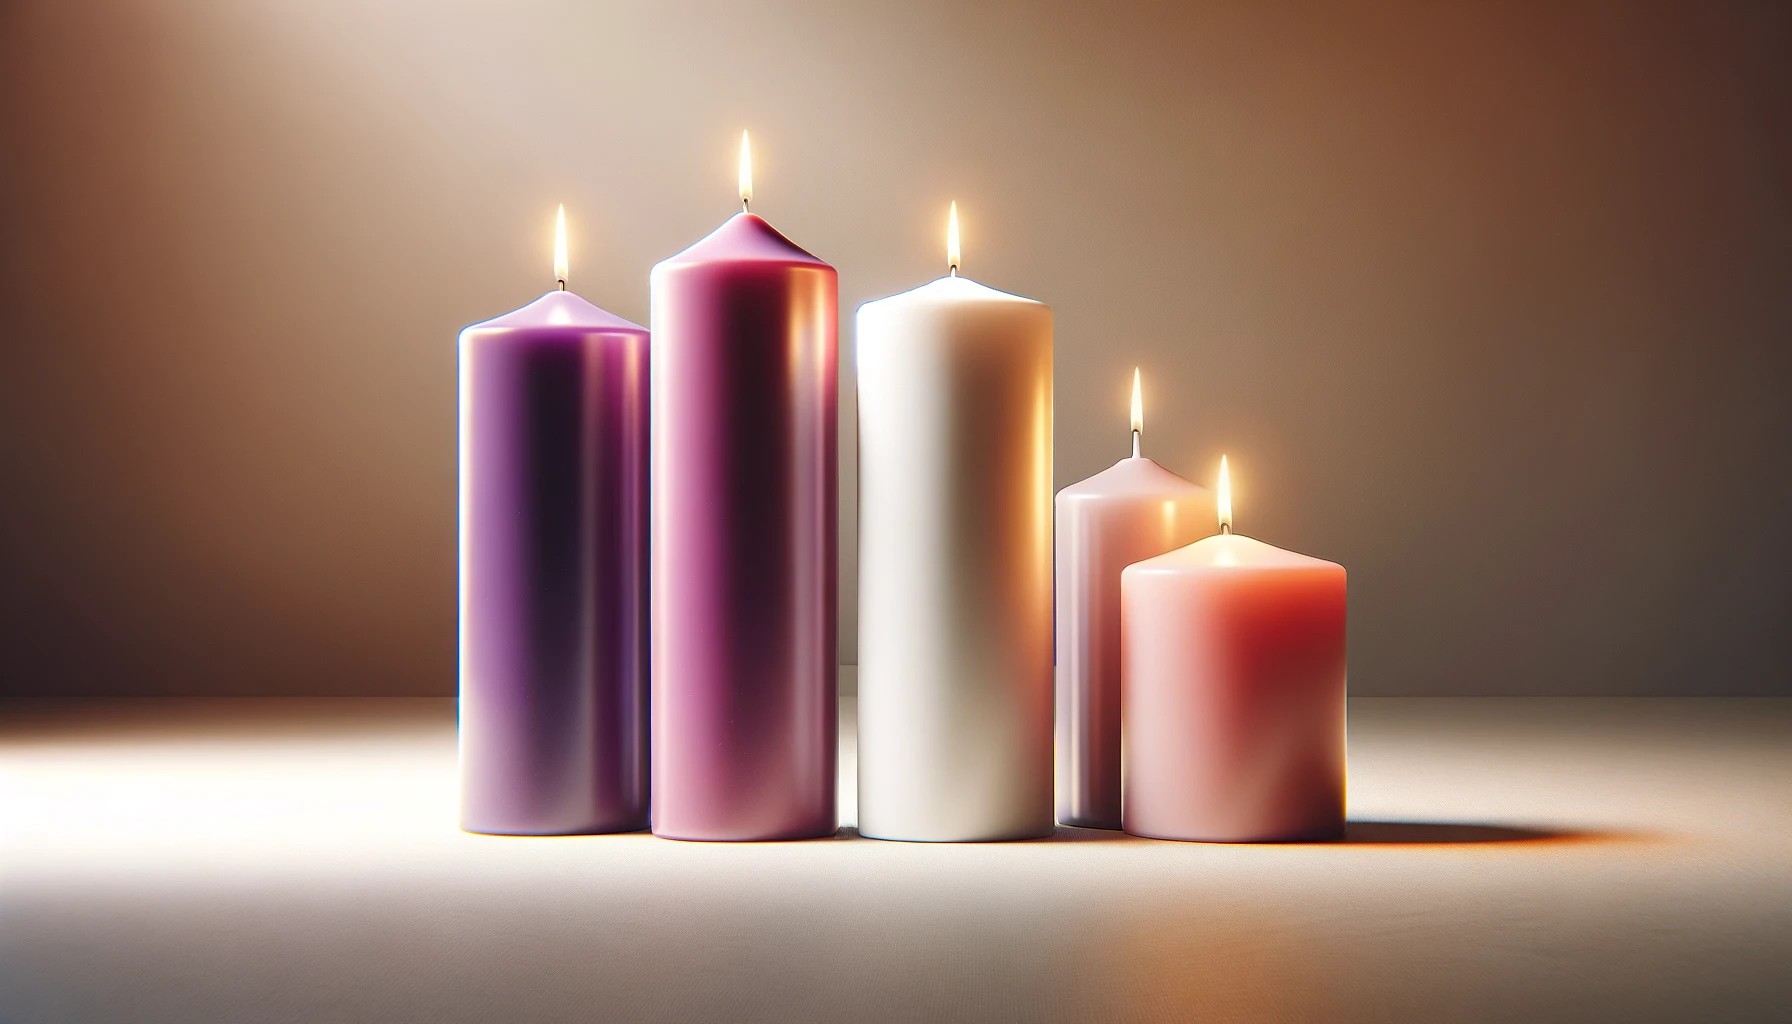 What Do The 5 Candles Of Advent Represent?